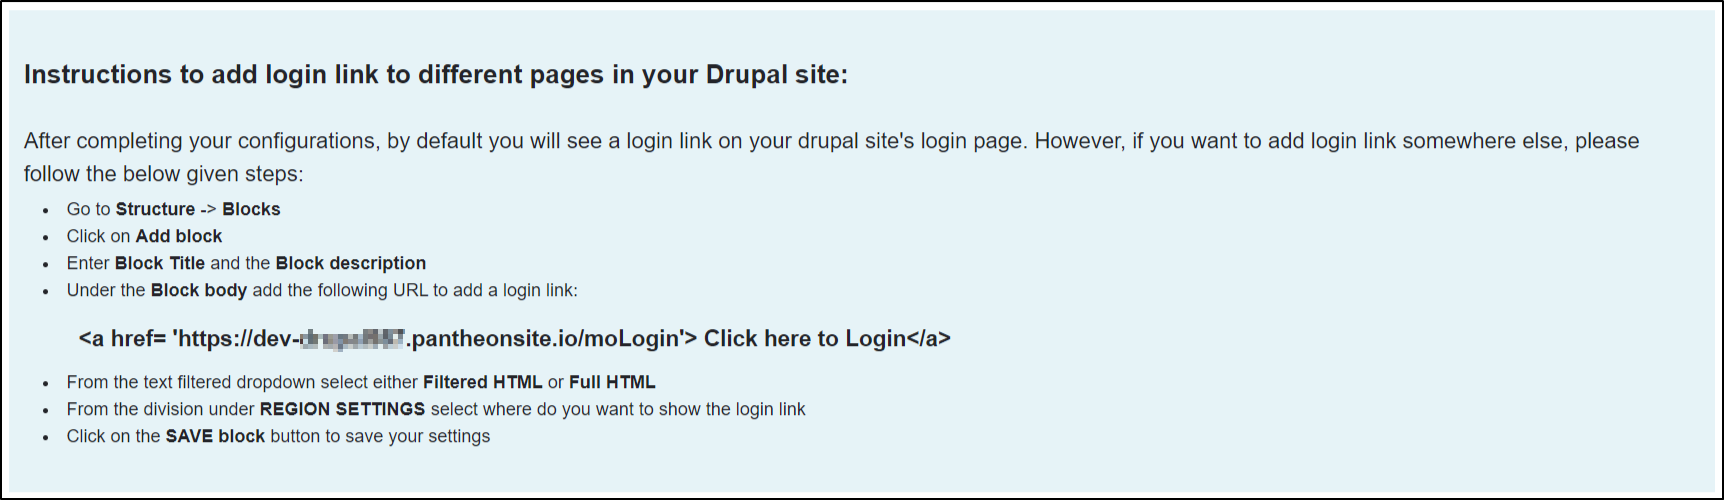 Drupal-OAuth-OIDC-Client-Configuration-Instruction-to-add-login-link-to-different-pages-in-your-drupal-site